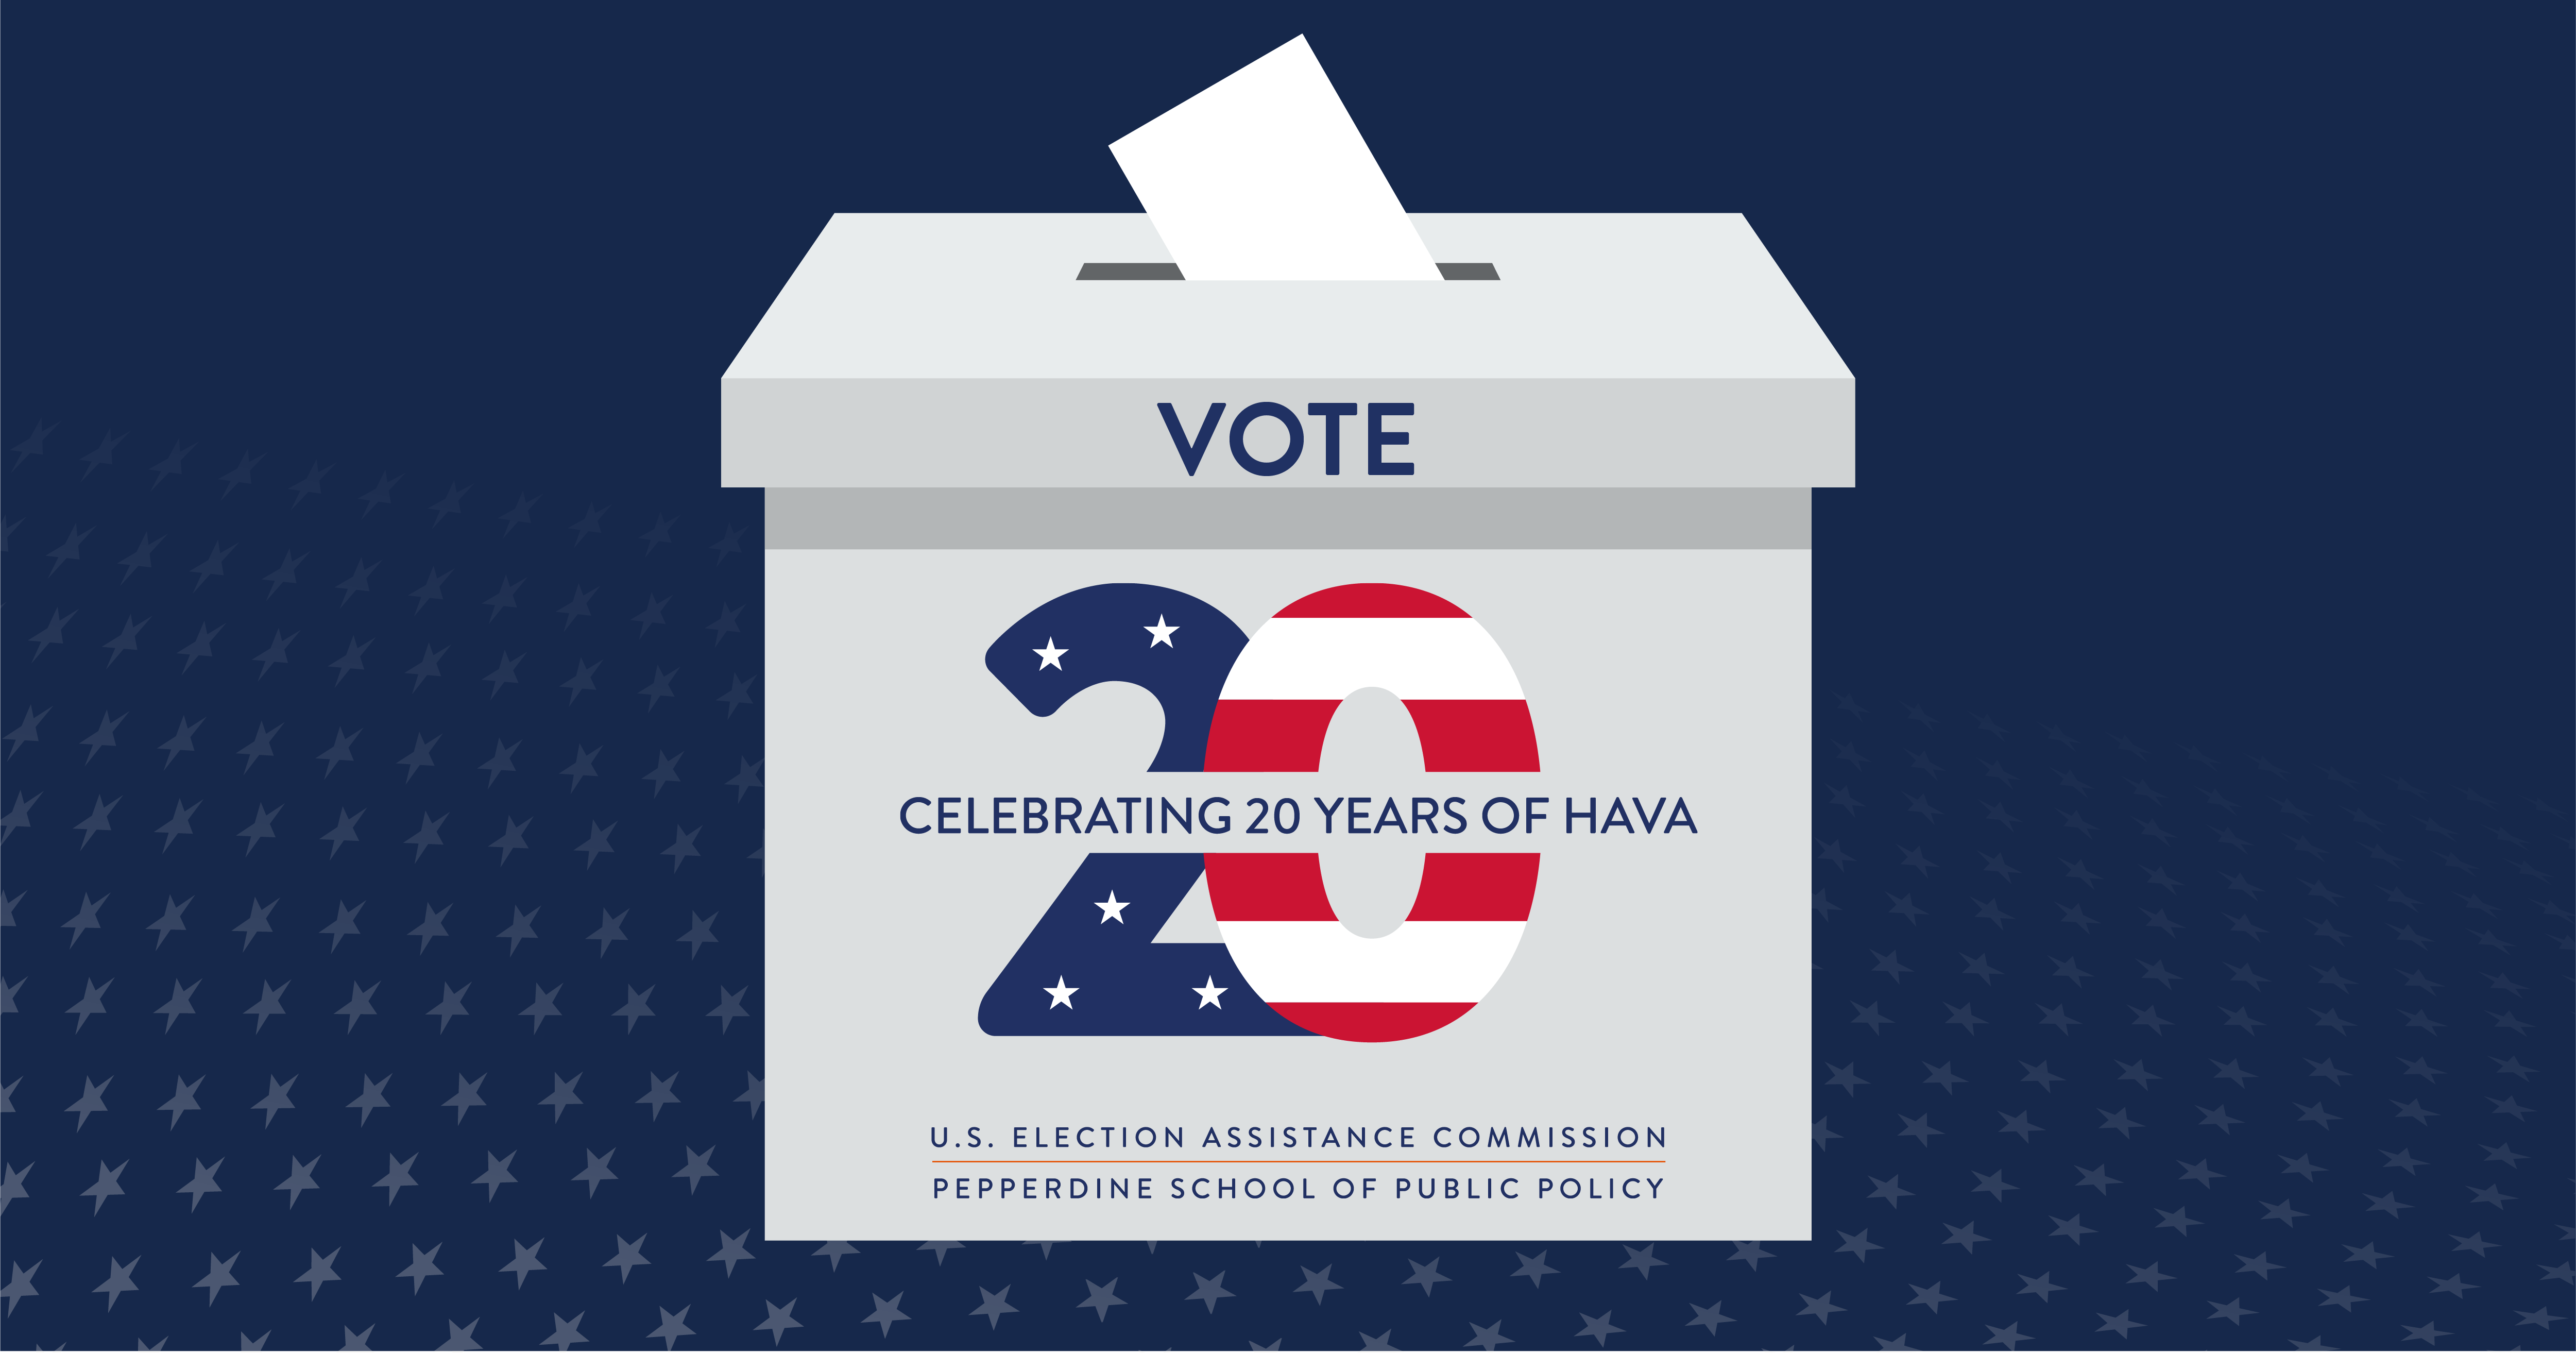 Logo with ballot box with large red white and blue 20 and "Celebrating 20 Years of HAVA" in the center.